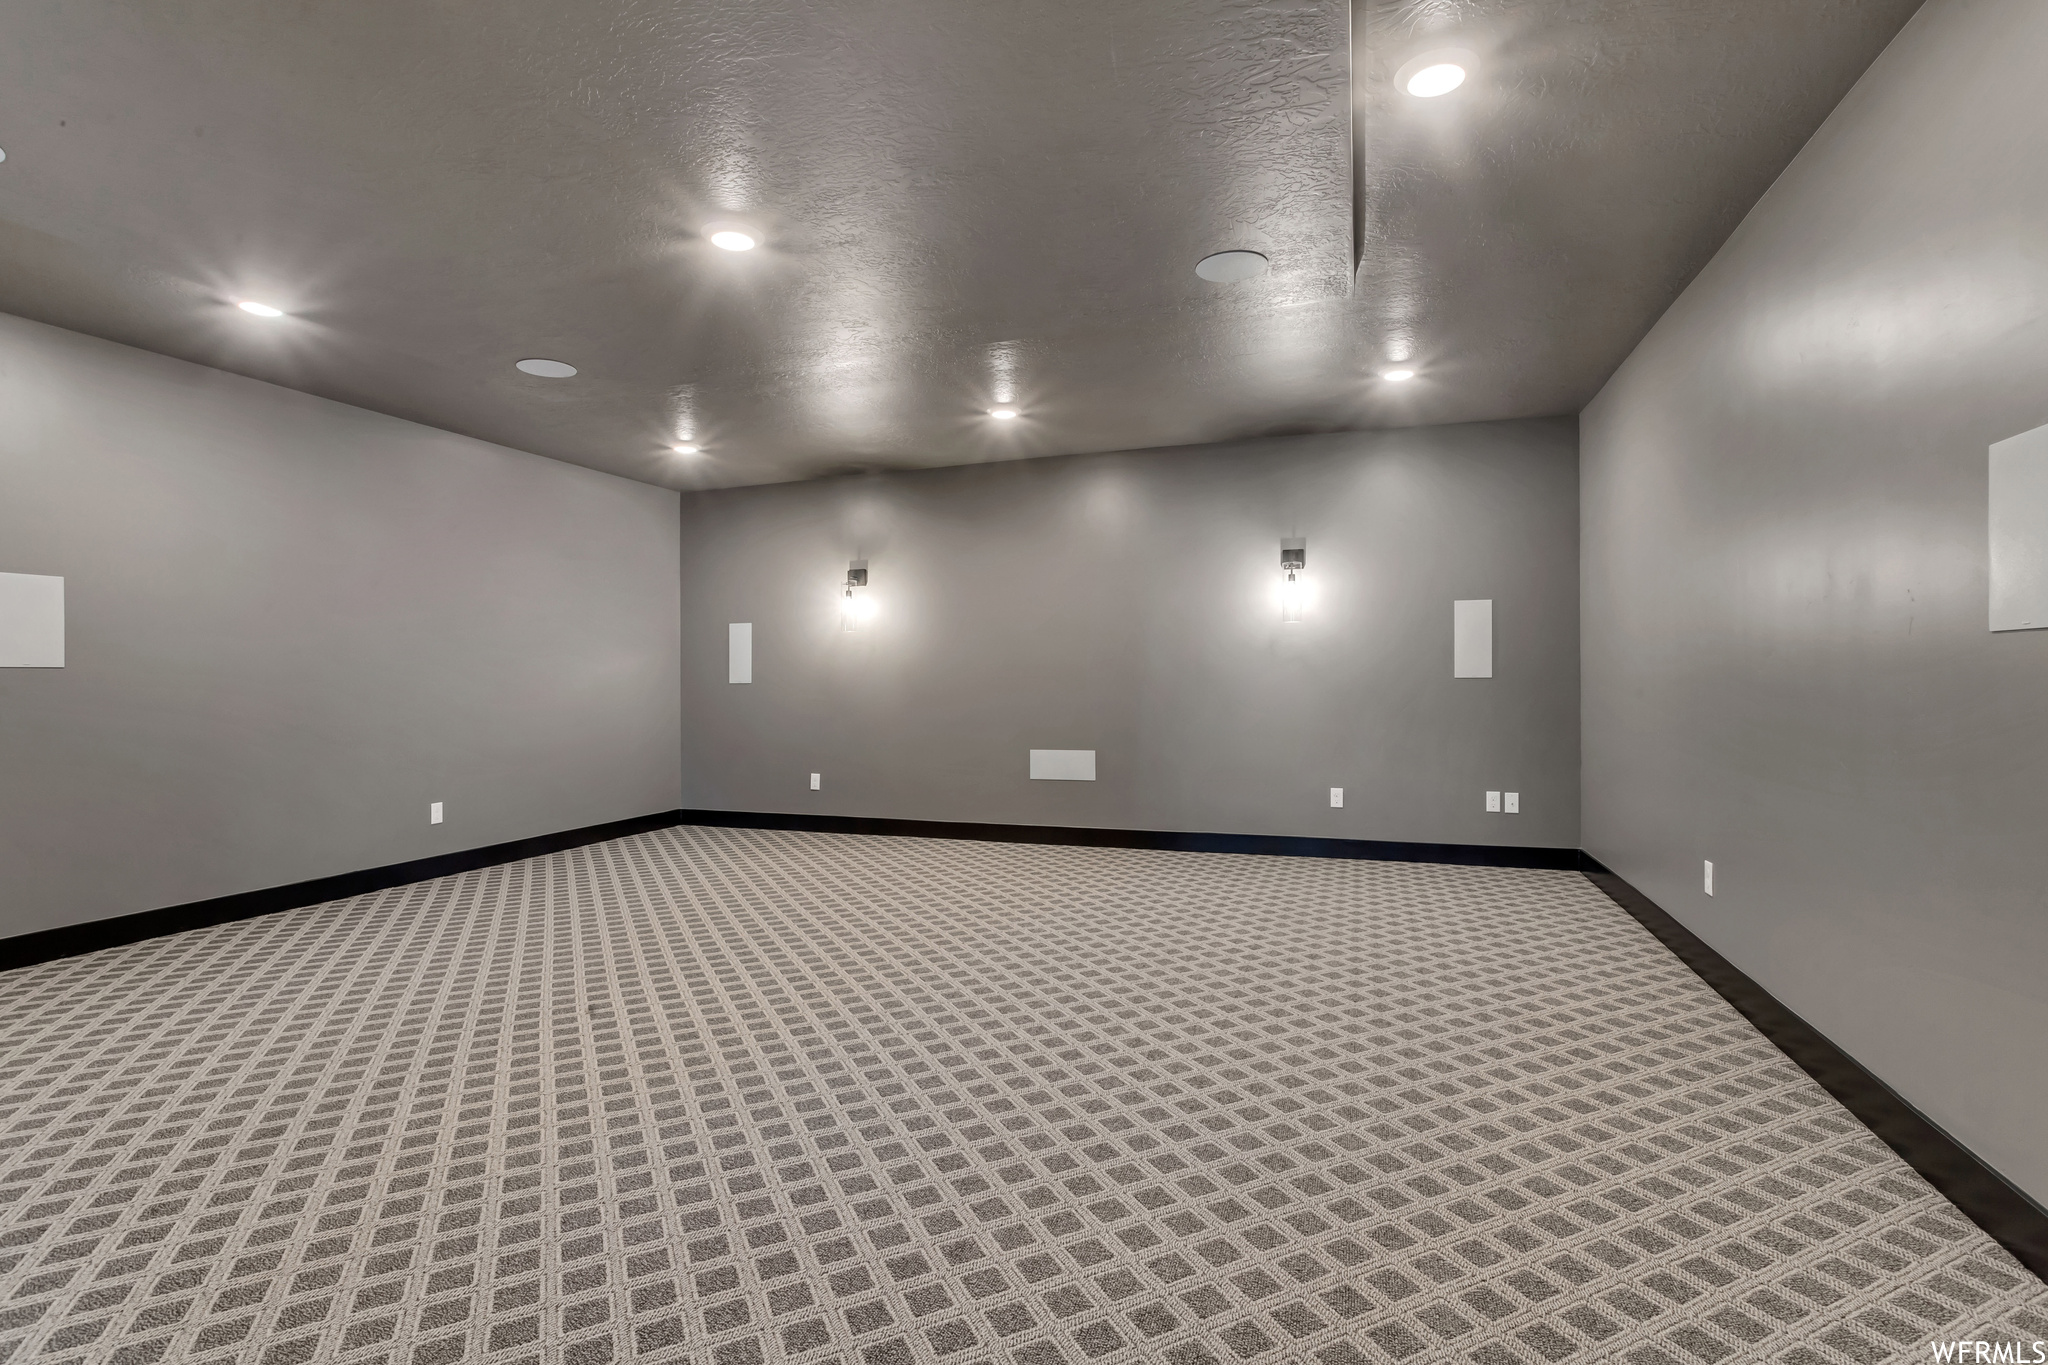 This theater features dark walls and ceiling, an upgraded theater package and fun flooring